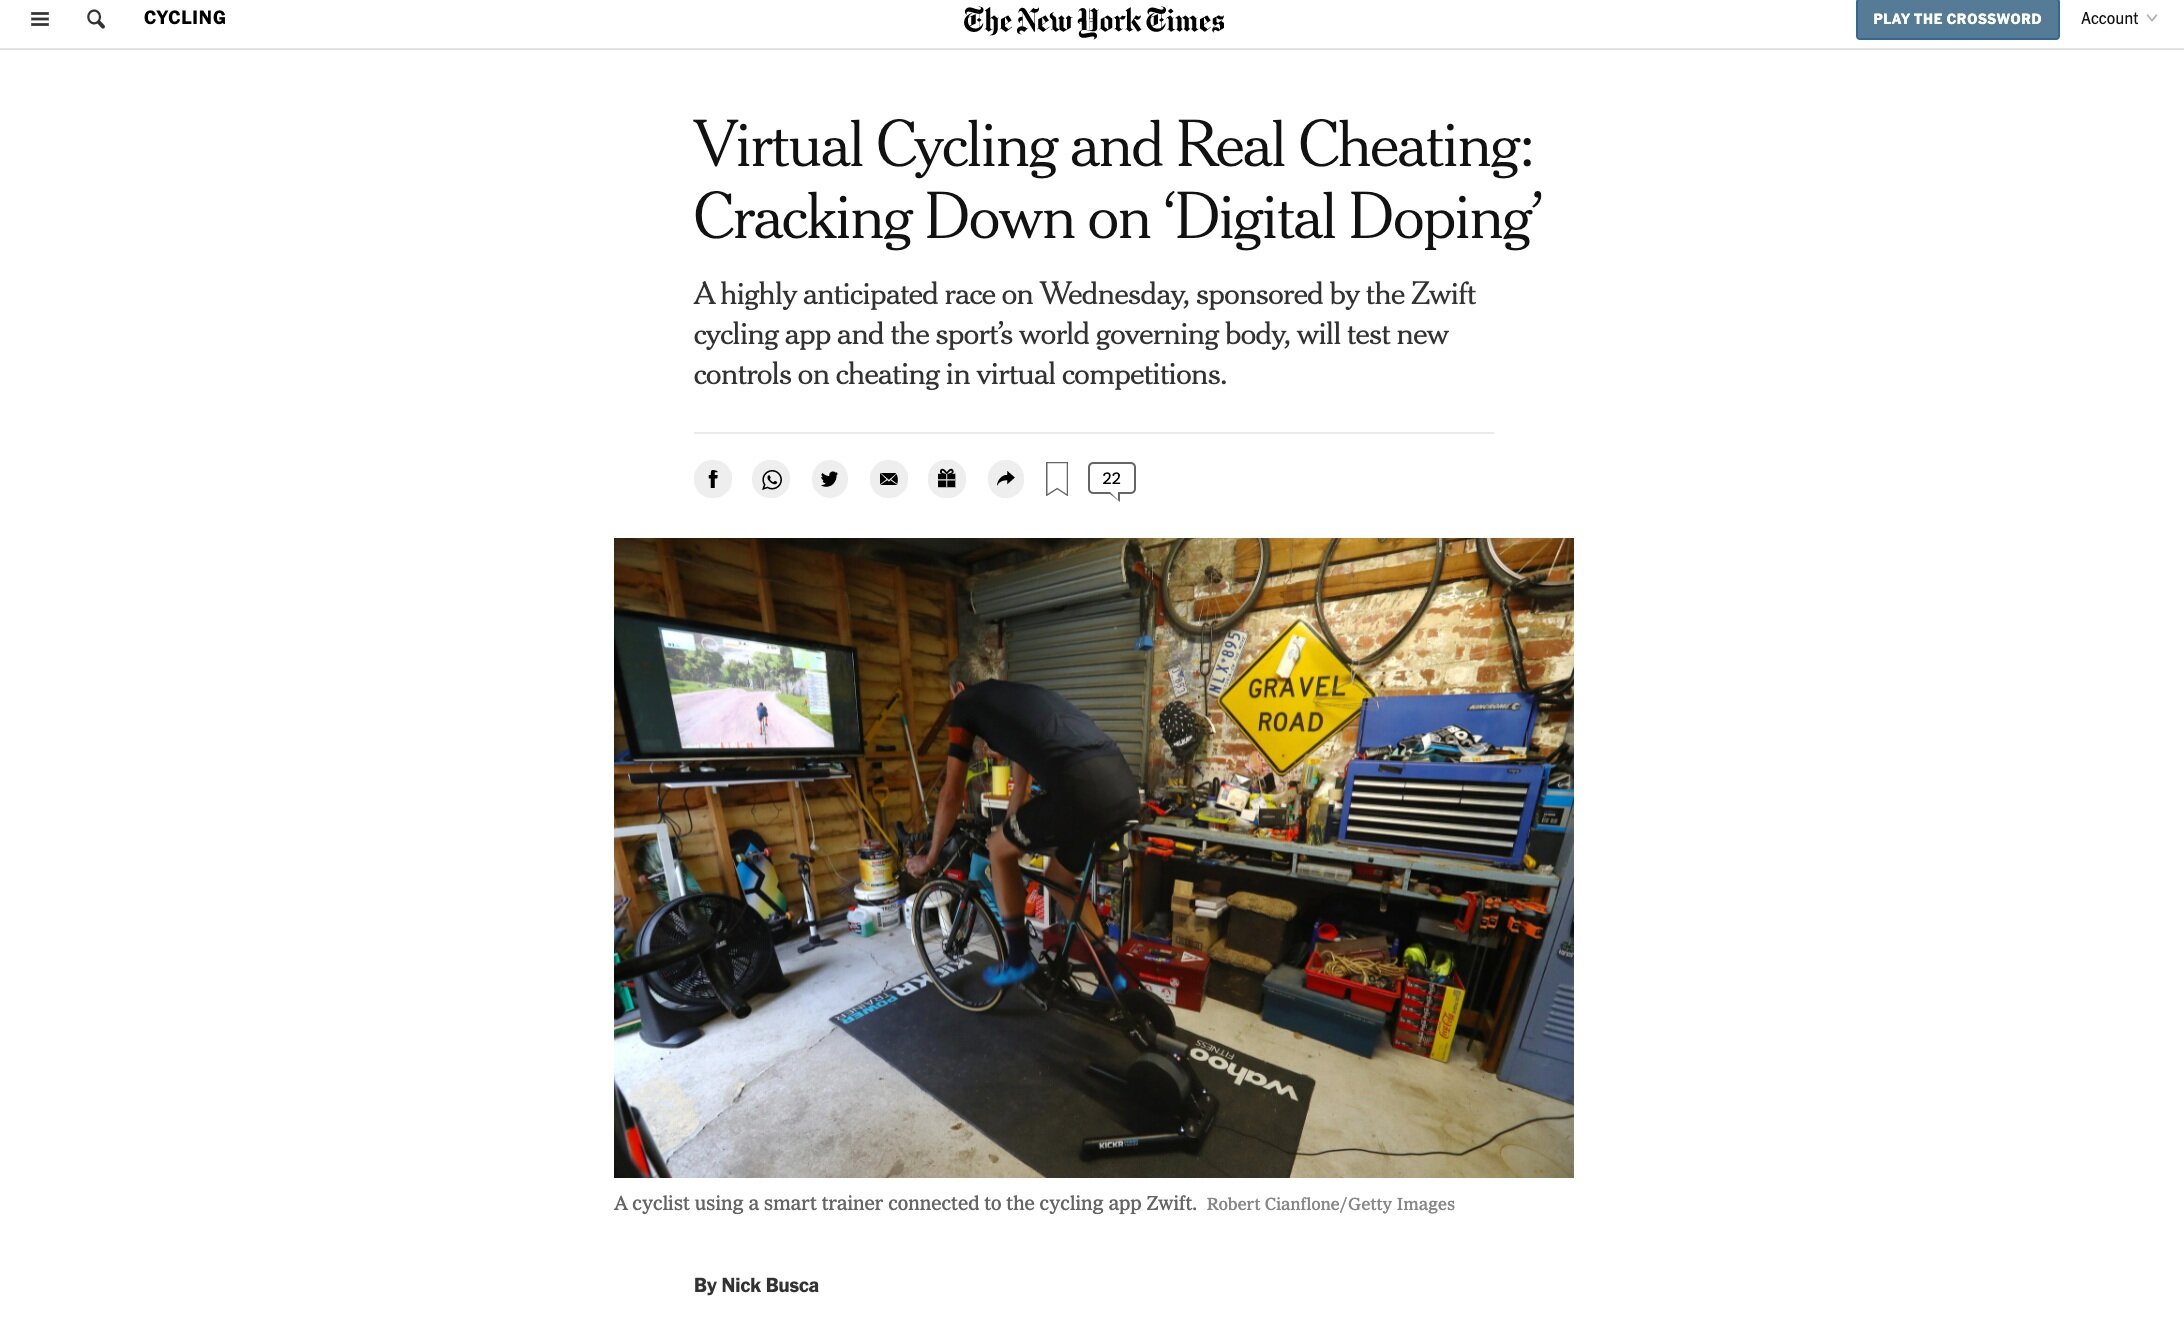 Virtual Cycling and Real Cheating: Cracking Down on ‘Digital Doping’